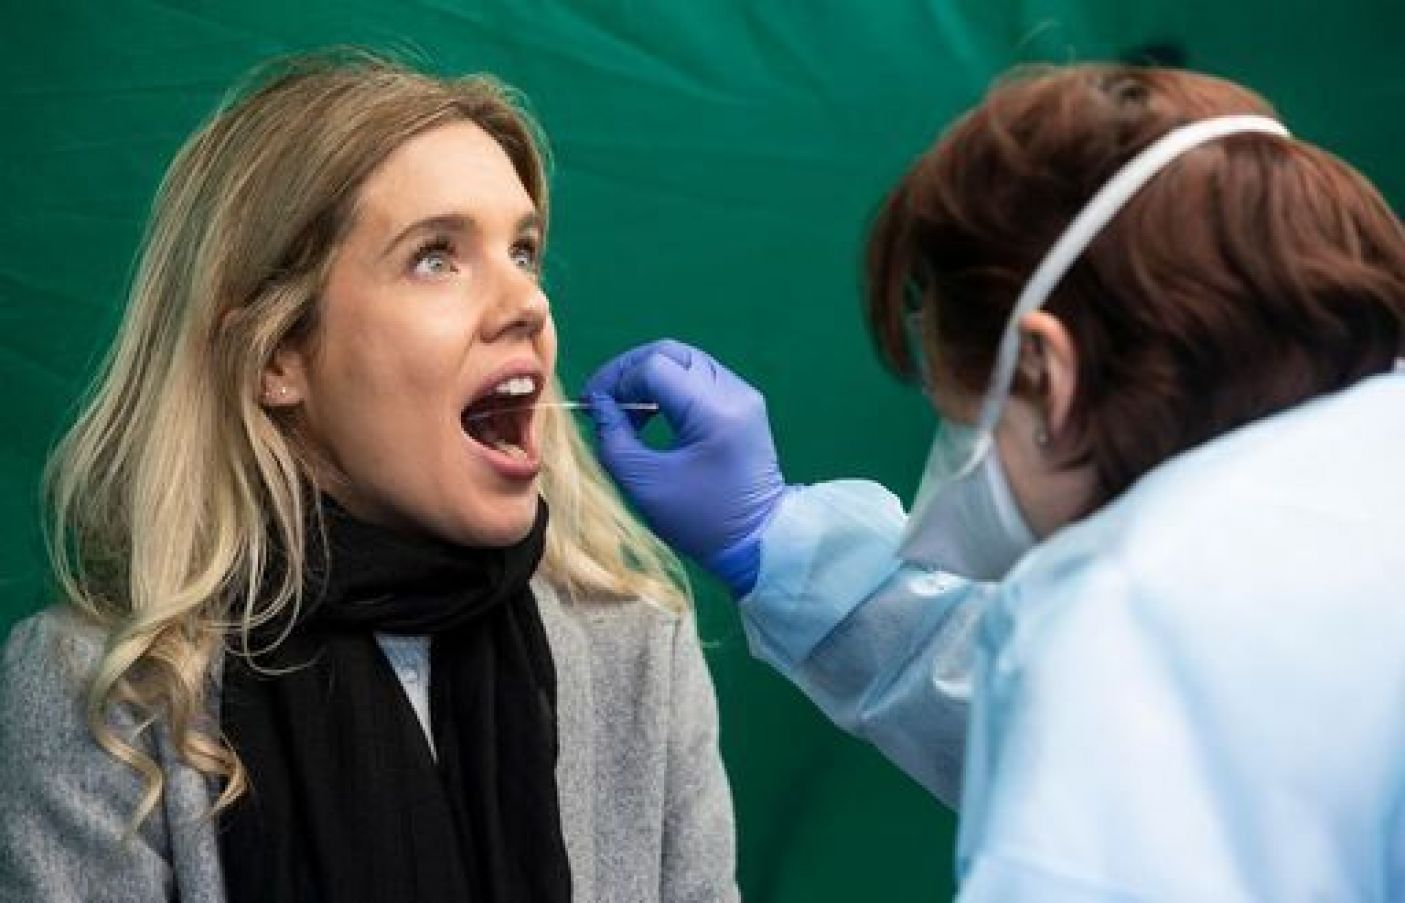 Amanda Kenny Receives A Swab At A Walk-In Test Centre On The Grounds Of Grangegorman Primary Care Centre In Dublin As A Number Of Centres Have Opened In Areas Where There Is A High Rate Of Covid-19 Transmission. The Public Does Not Need To Get A Gp Referral And All Tests Will Be Free Under The New Initiative. Picture Date: Thursday March 25, 2021.